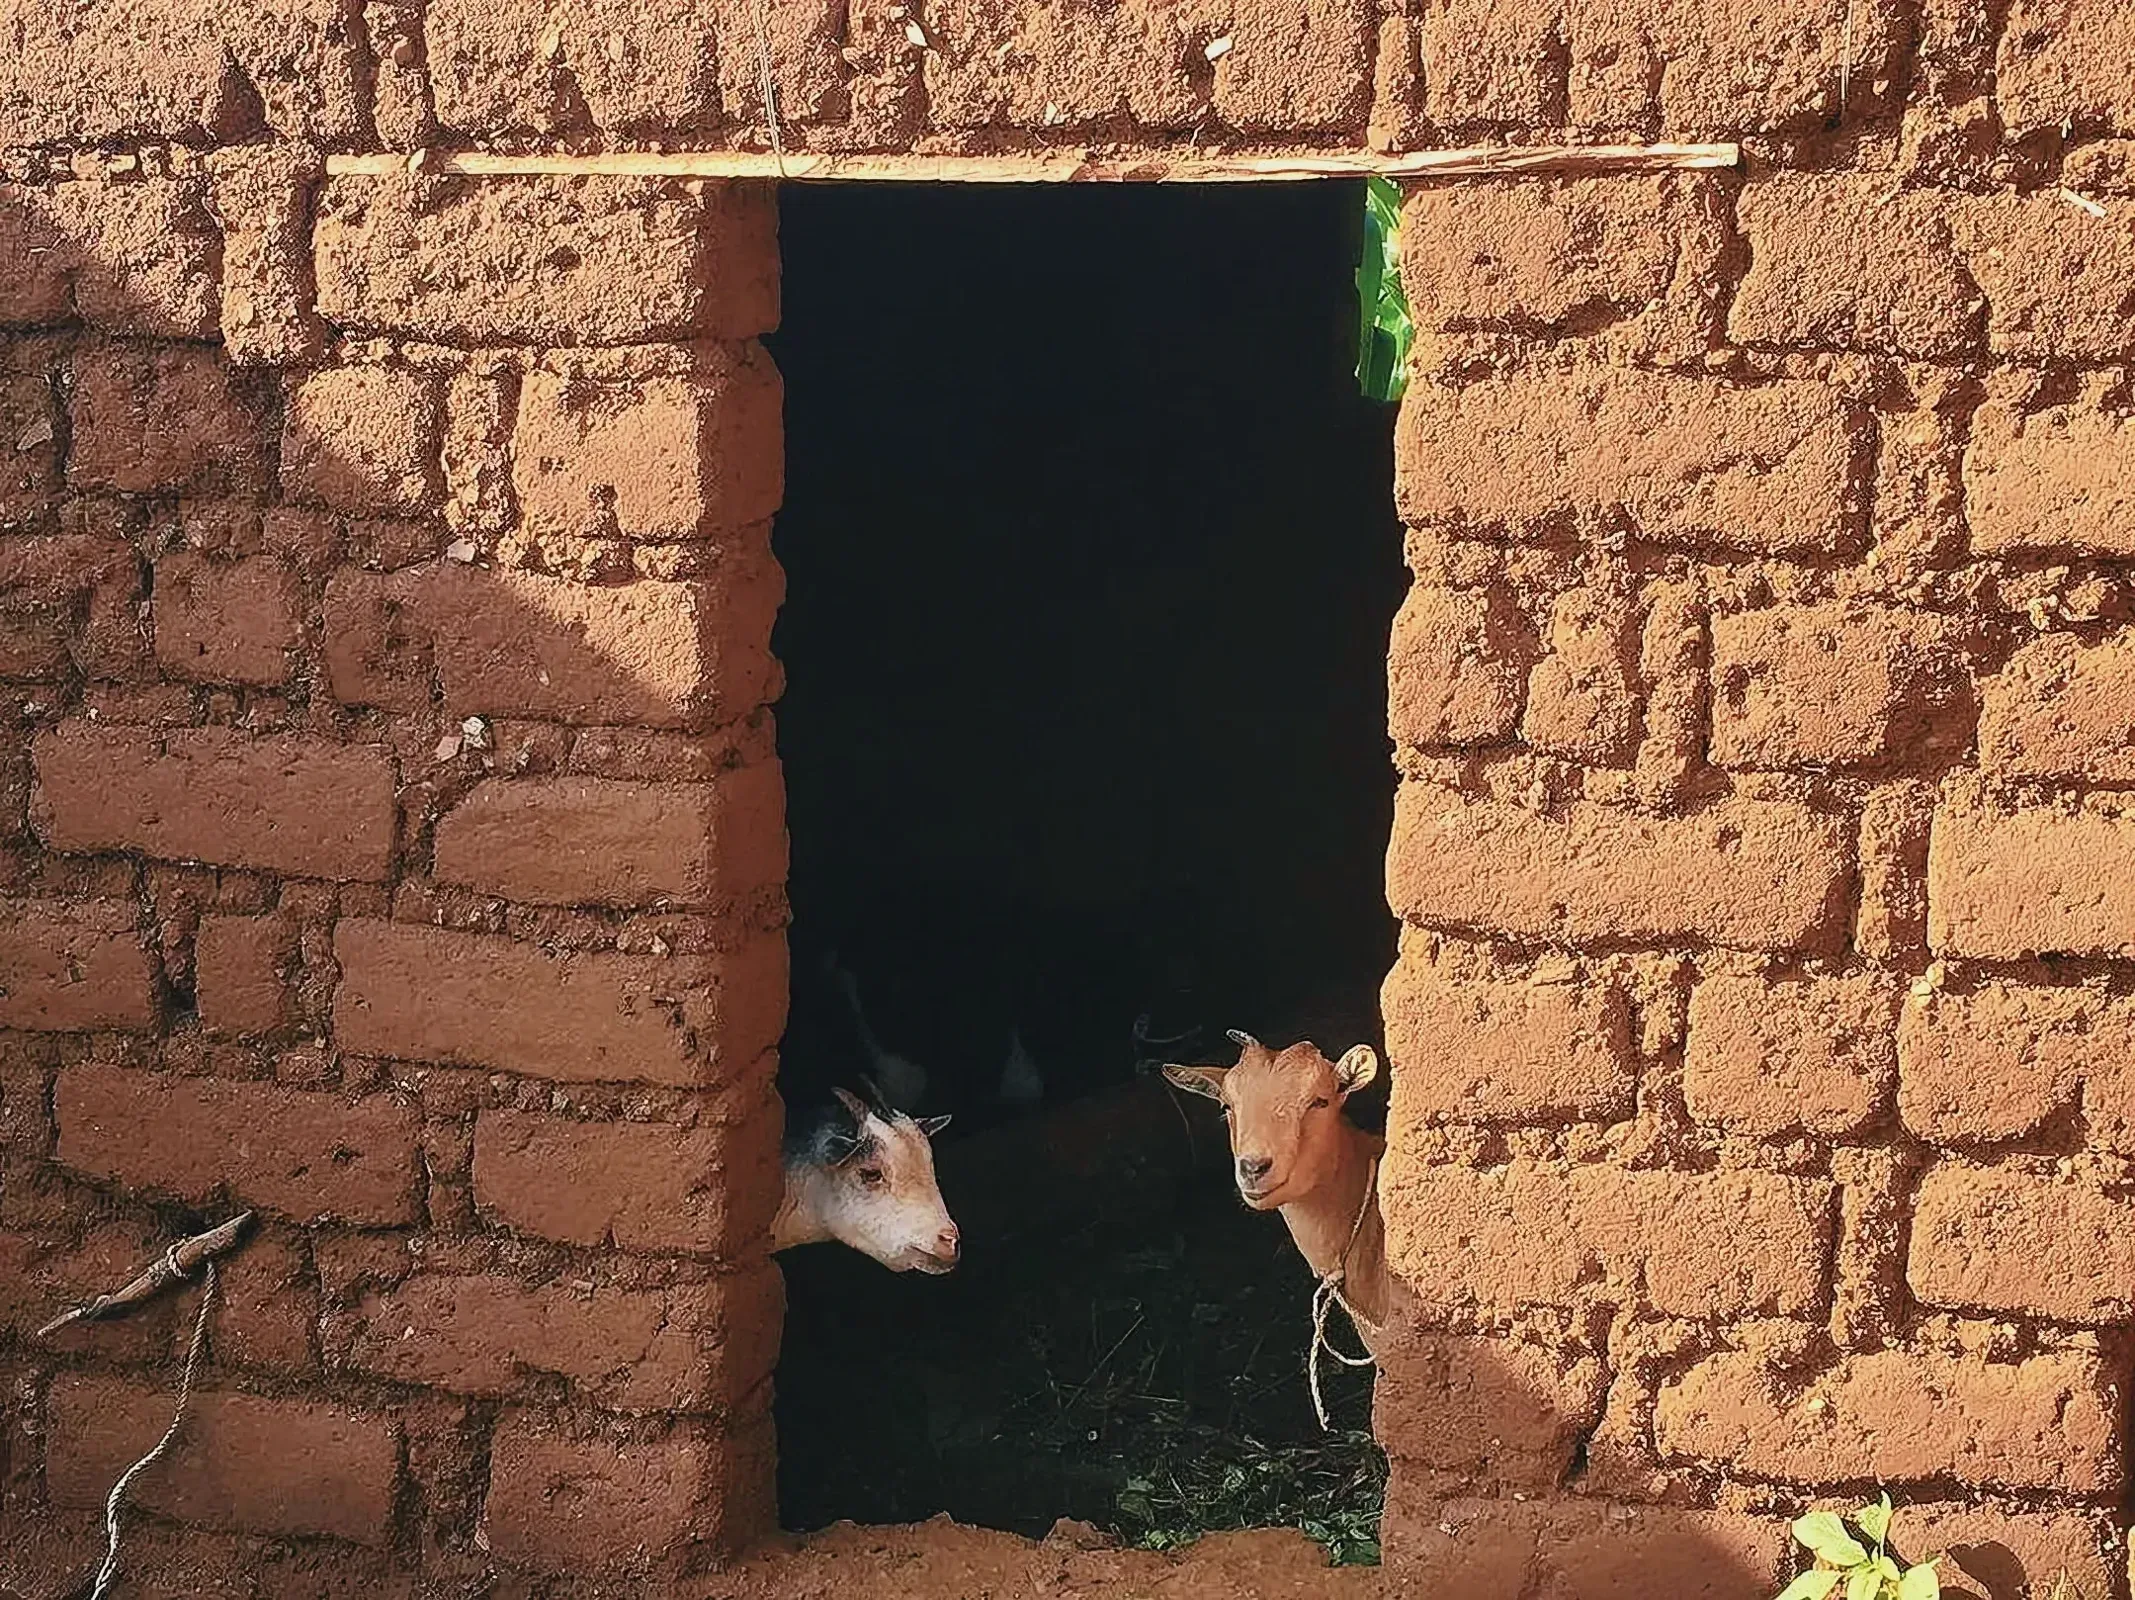 Goats standing in a doorway in a rustic setting